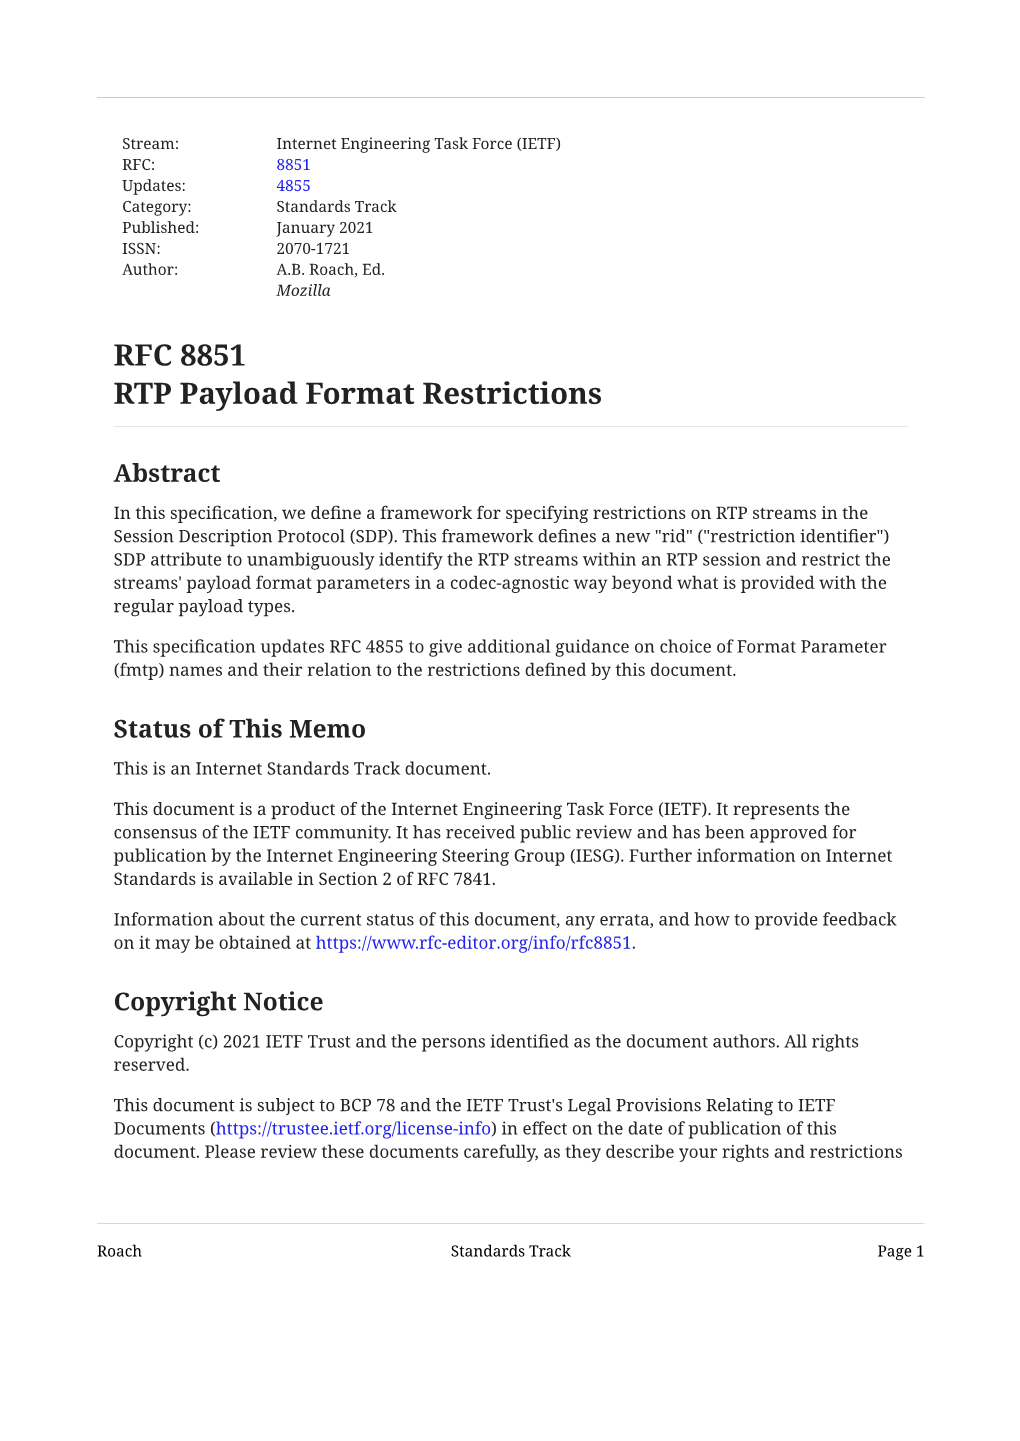 RFC 8851: RTP Payload Format Restrictions